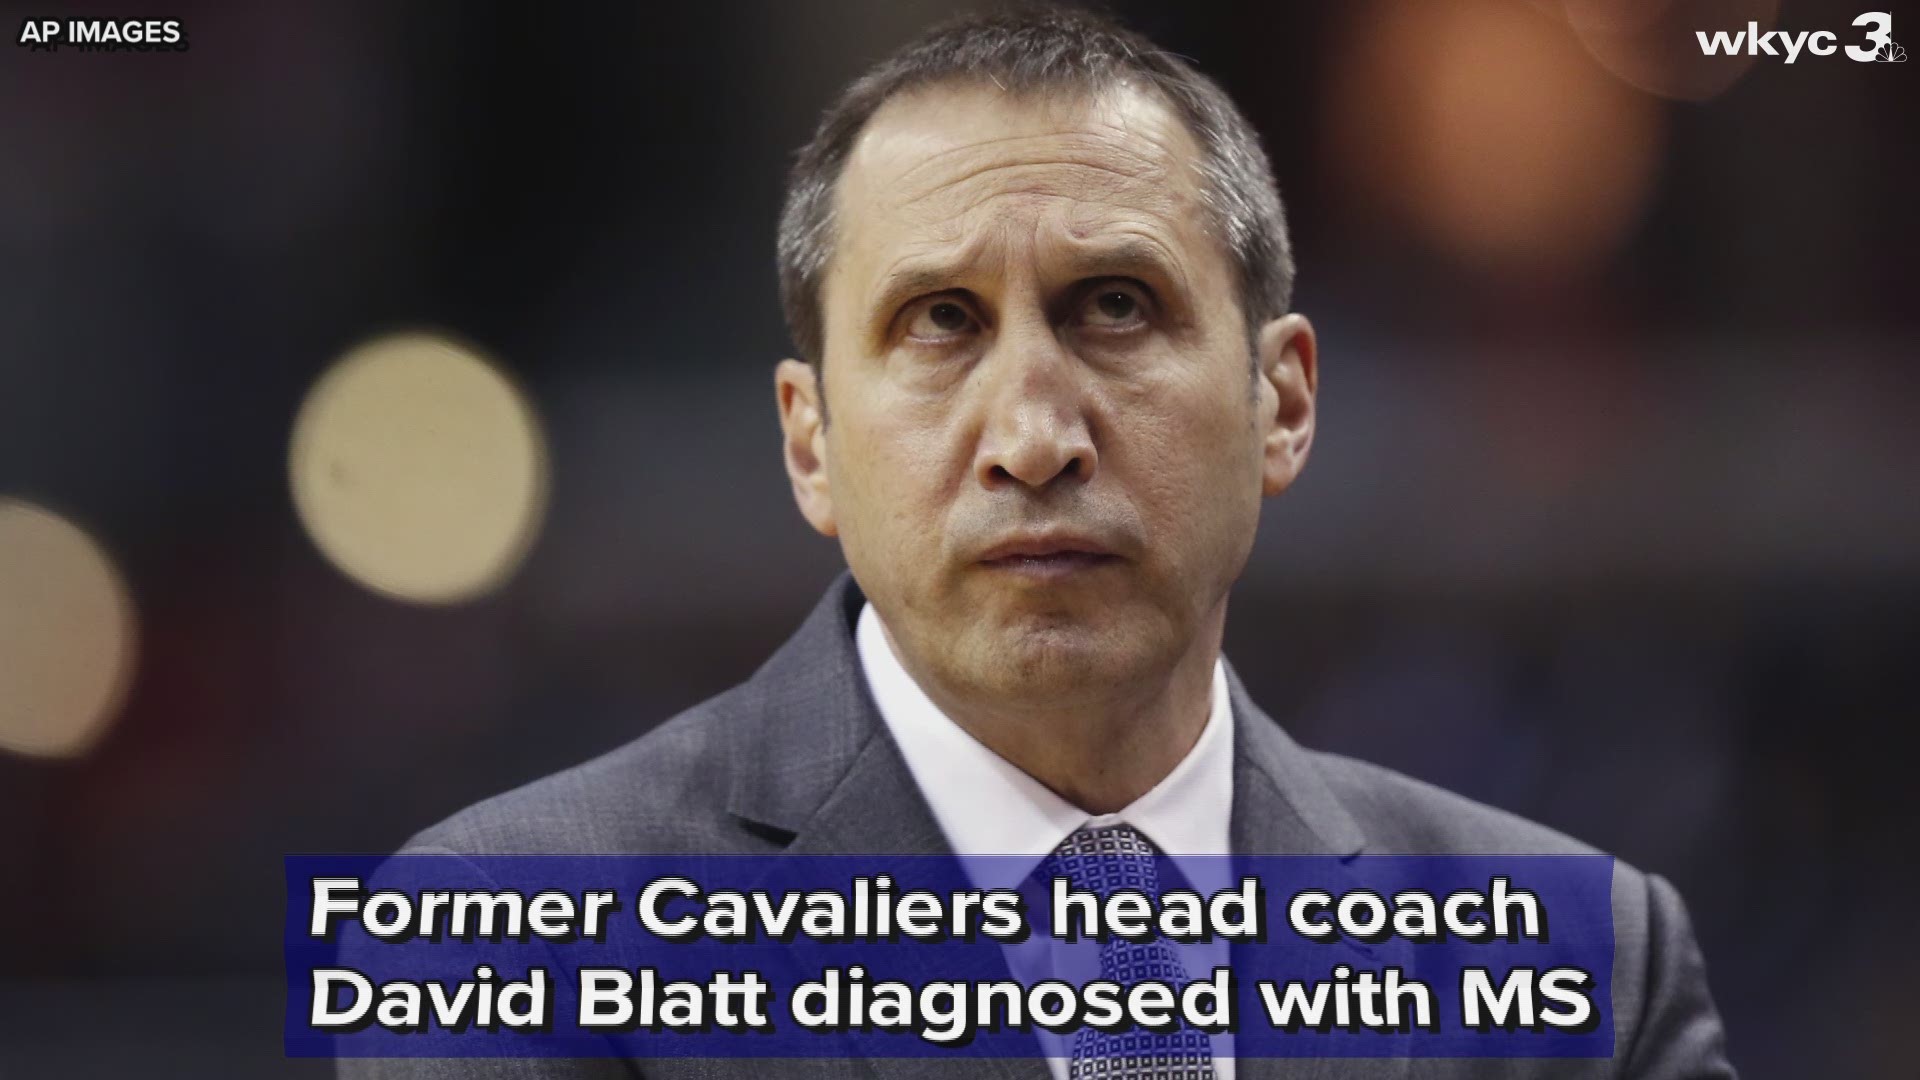 Former Cleveland Cavaliers coach David Blatt revealed on Monday that he was diagnosed with multiple sclerosis "a few months ago."